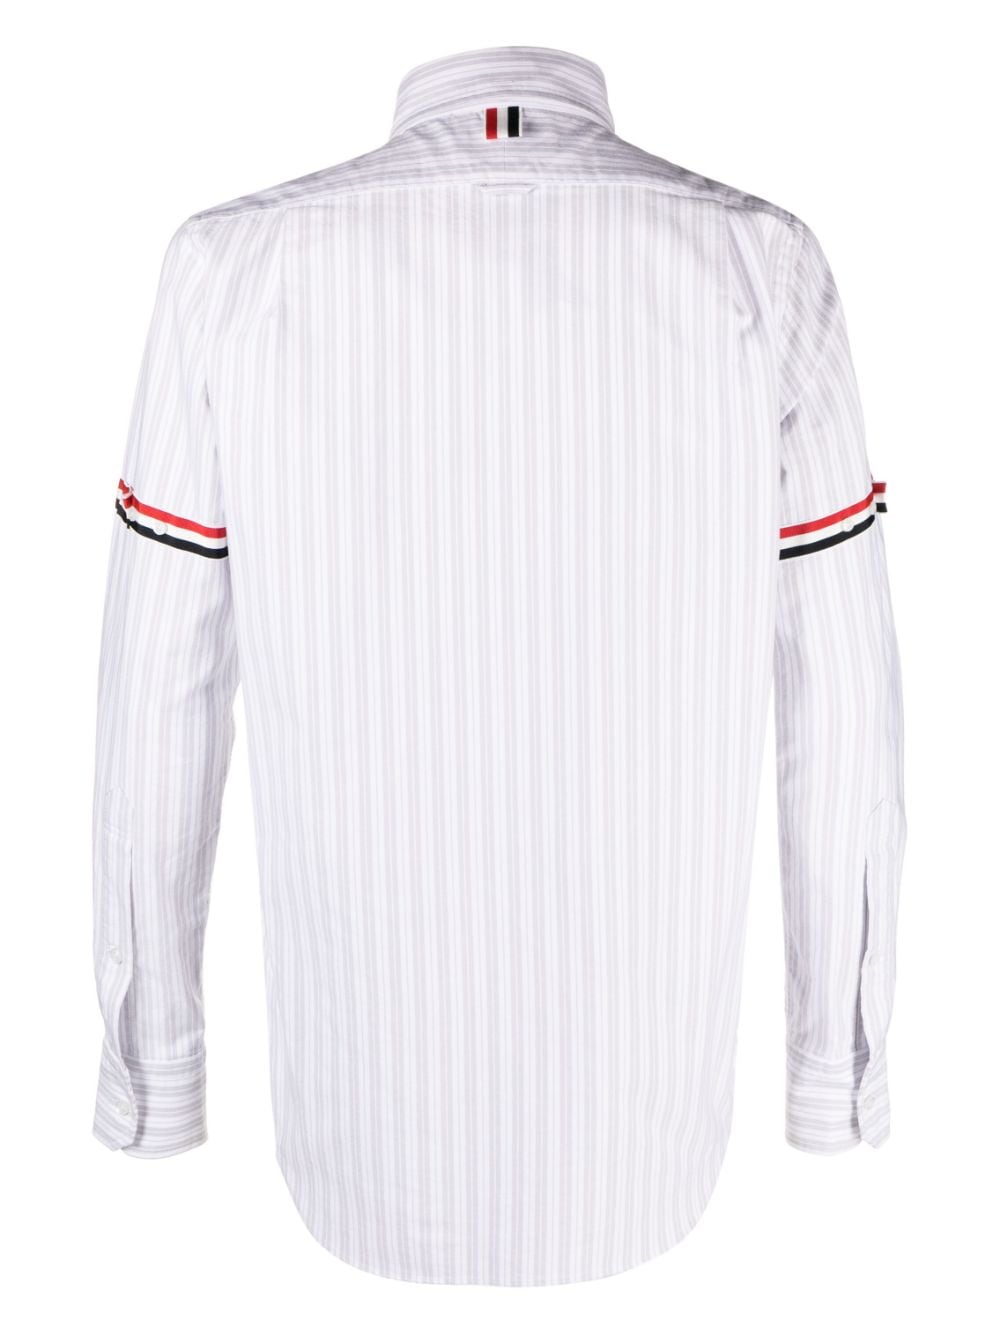 THOM BROWNE Multicolor Striped Oxford Shirt for Men